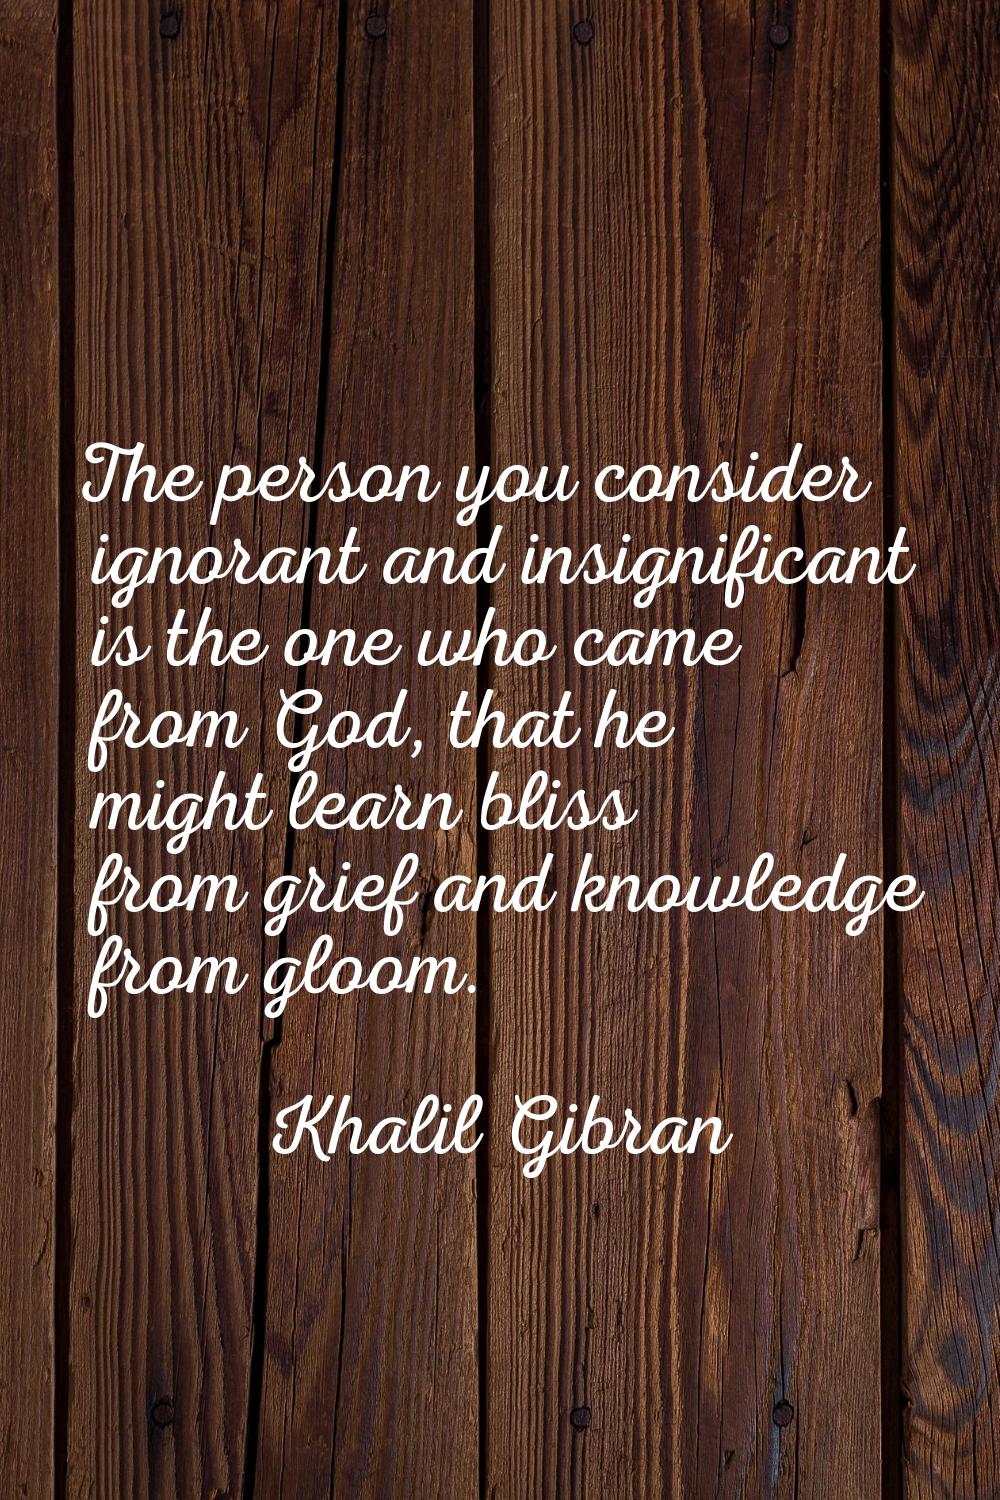 The person you consider ignorant and insignificant is the one who came from God, that he might lear